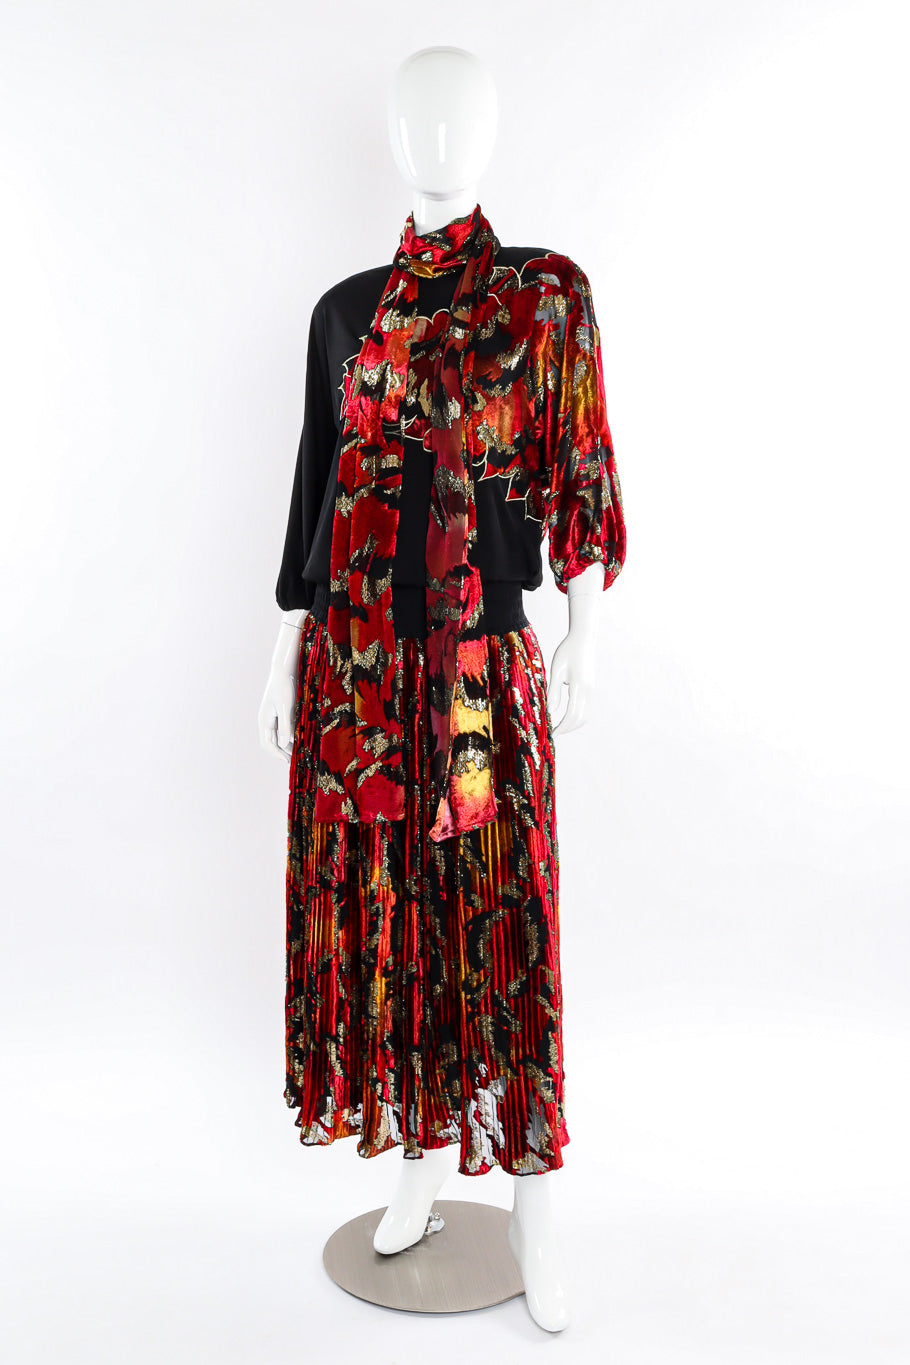 Multi-printed silk limited edition dress by Diane Freis mannequin full length @recessla